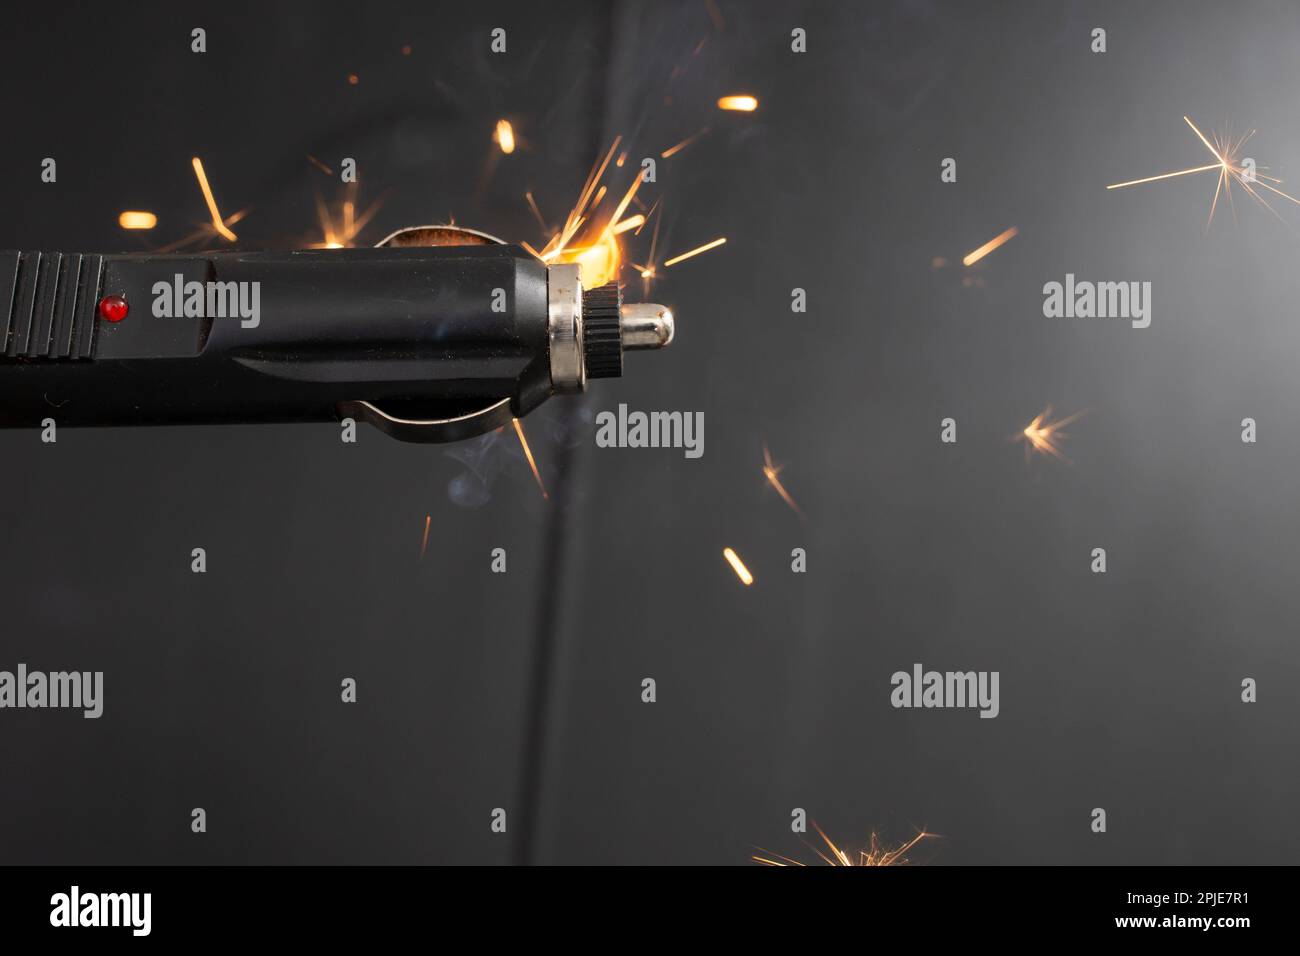 Cigarette lighter charger plug burning with sparks in a car, close up, concept Stock Photo